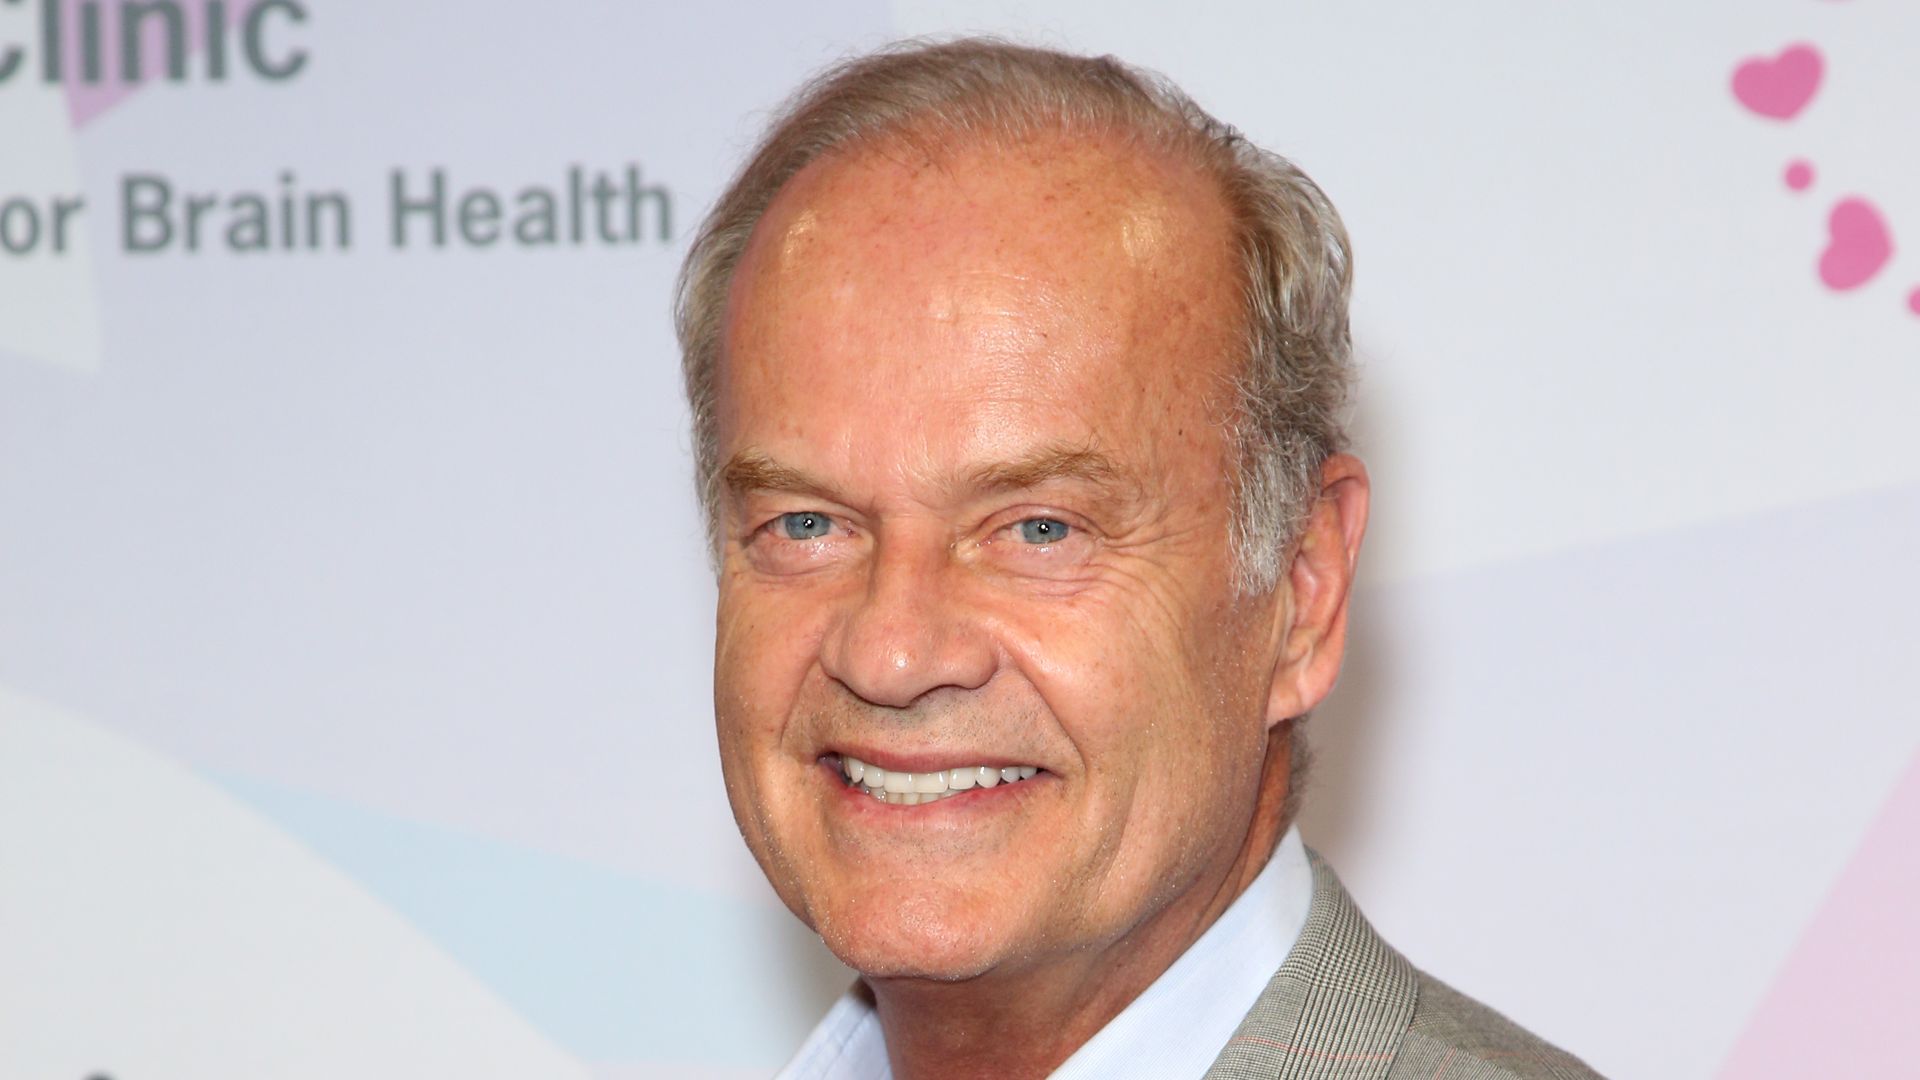 Kelsey Grammer attends the 24th annual Keep Memory Alive "Power of Love Gala" benefit for the Cleveland Clinic Lou Ruvo Center for Brain Health honoring Neil Diamond at MGM Grand Garden Arena on March 07, 2020 in Las Vegas, Nevada